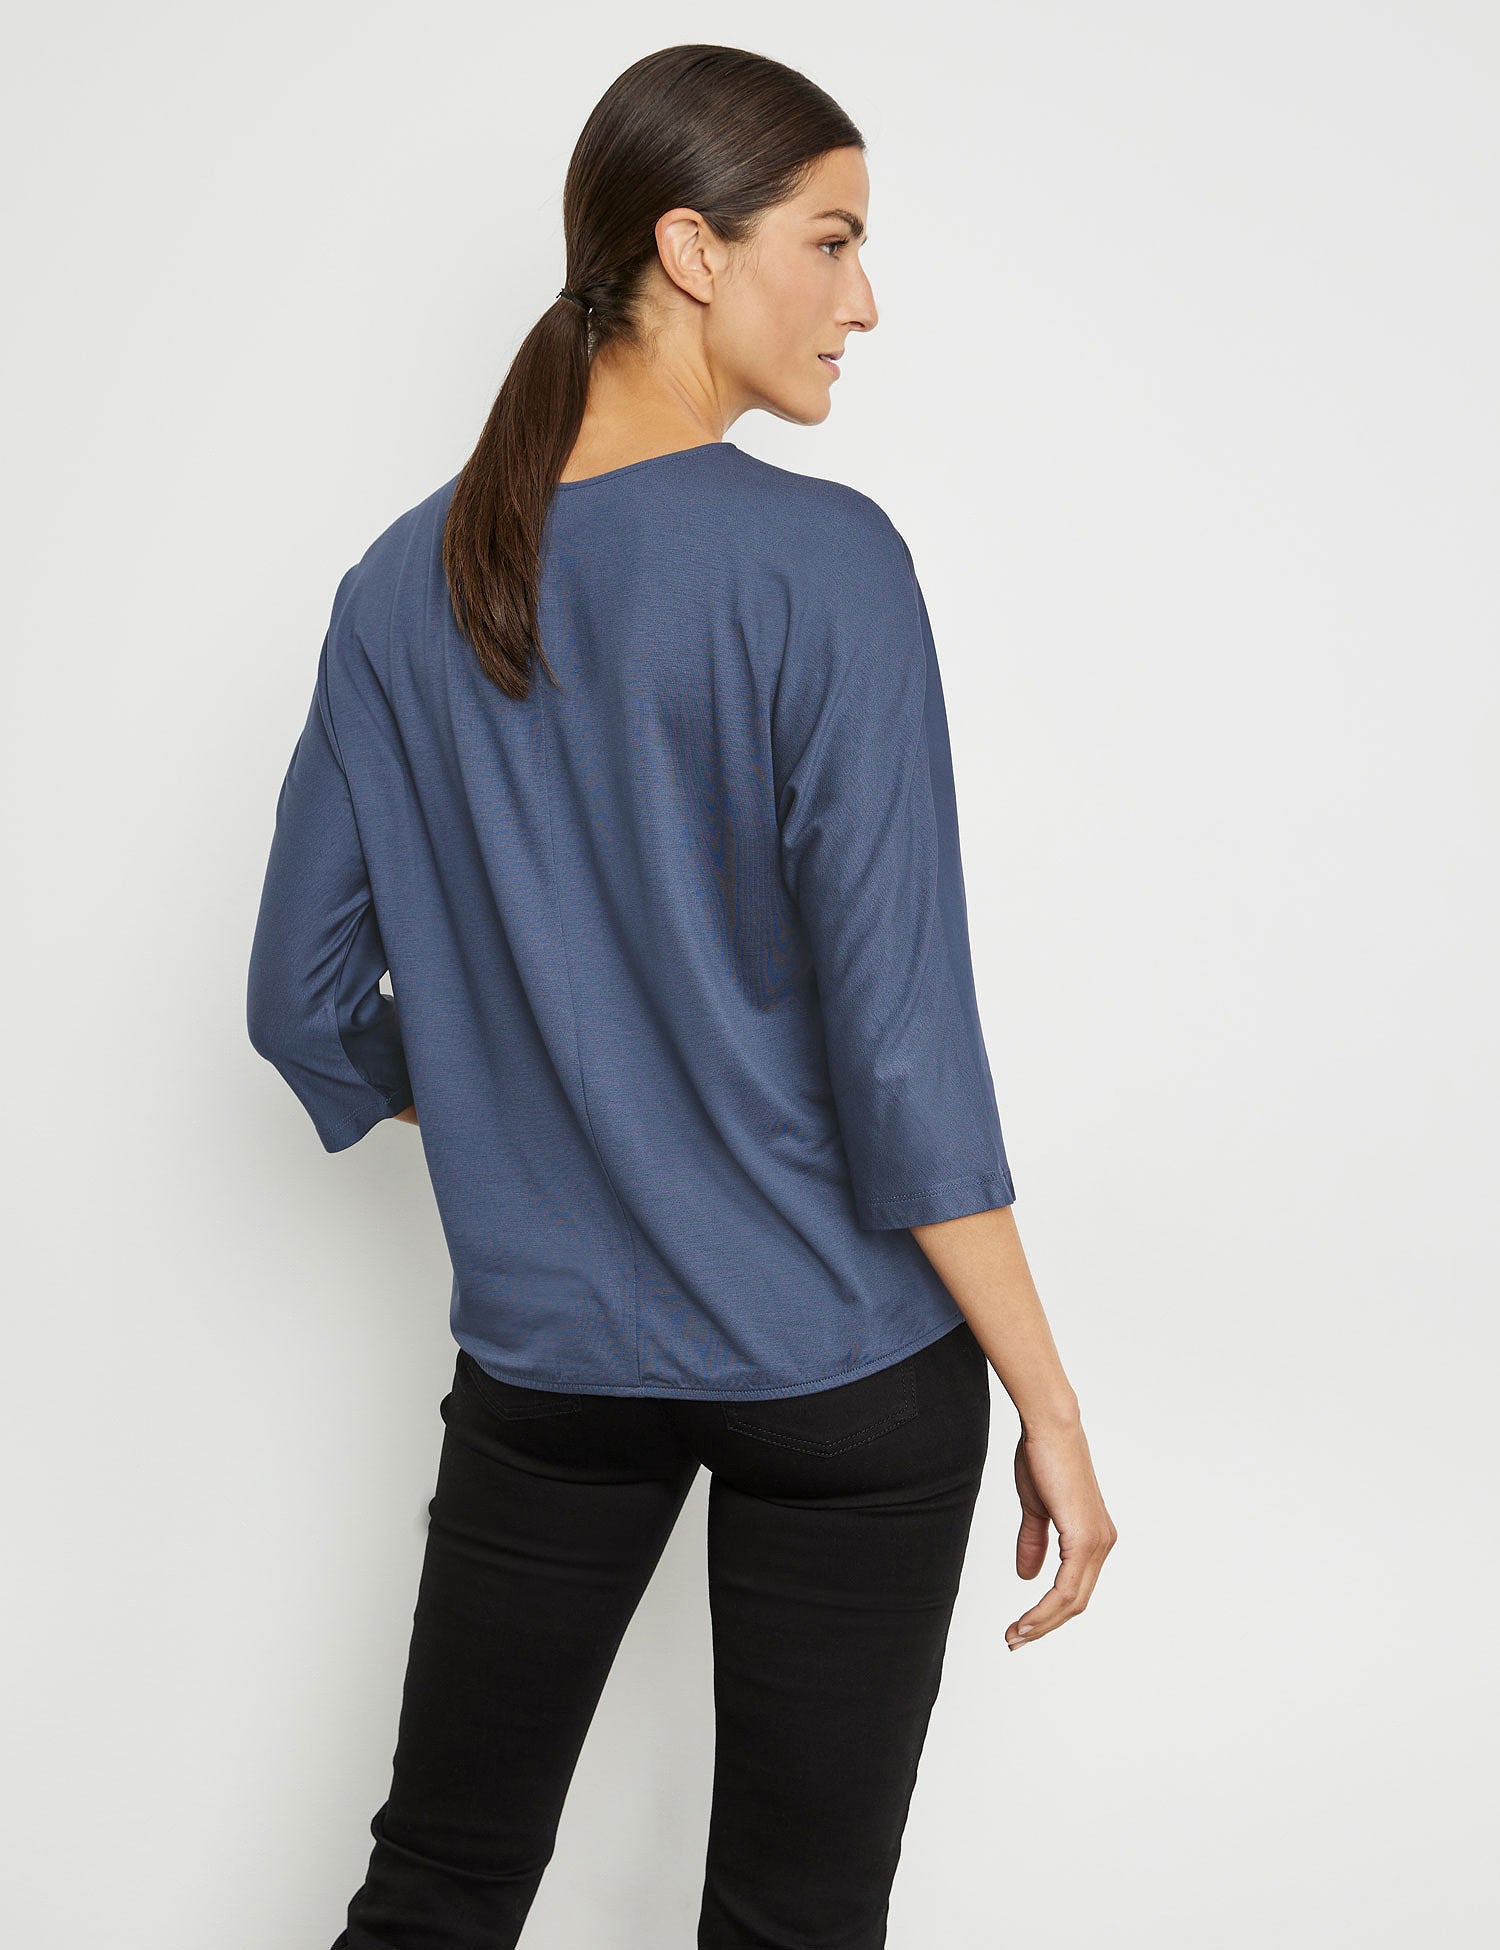 Blouse Top With Fabric Panelling And A Front Print_170095-44002_80929_06